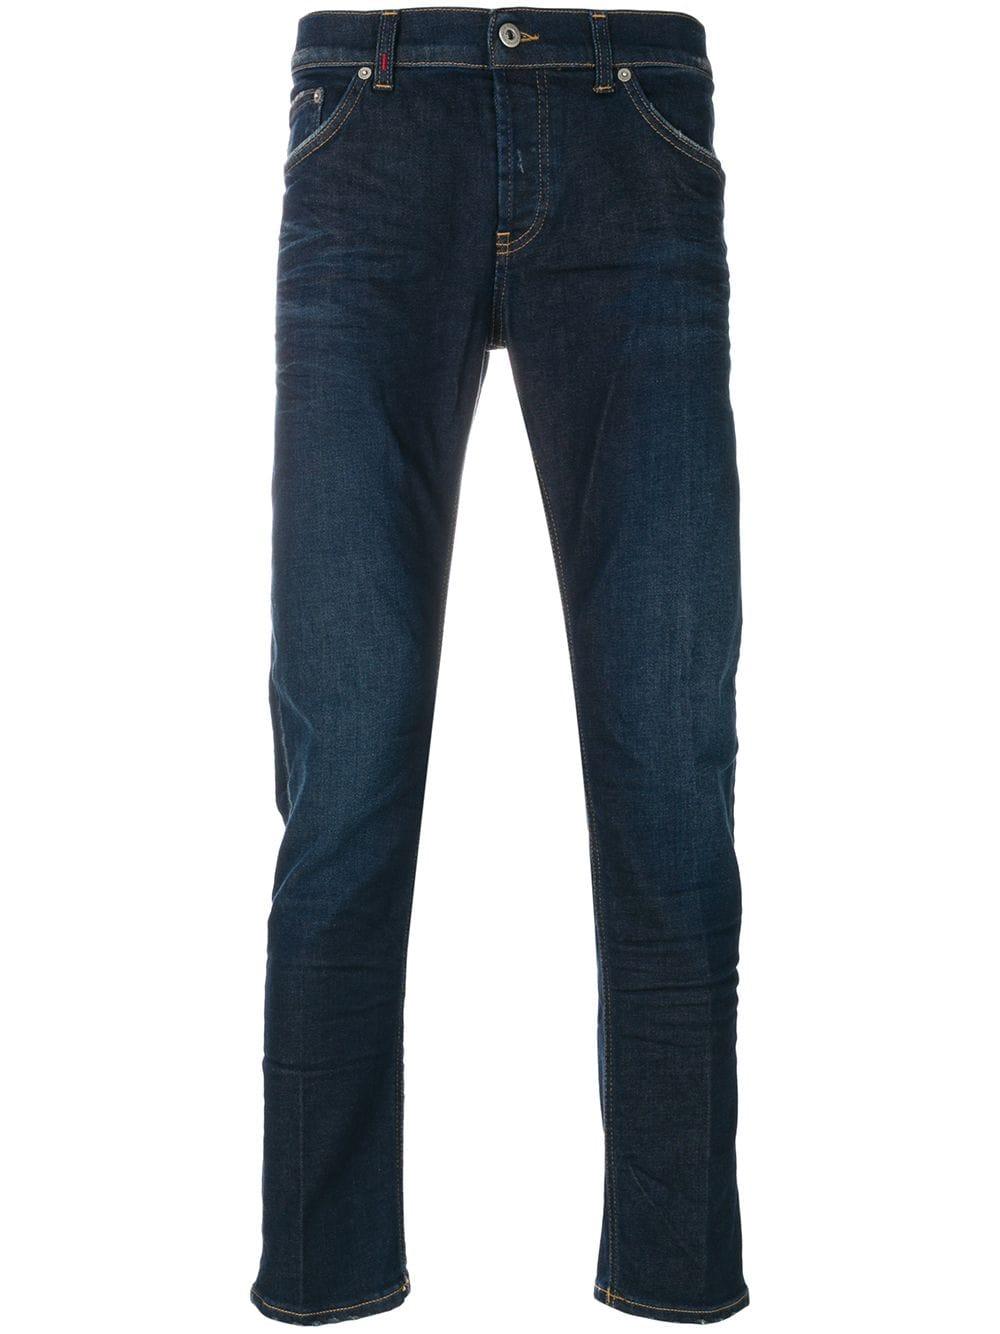 Dondup Denim Creased Faded Jeans in Blue for Men - Lyst